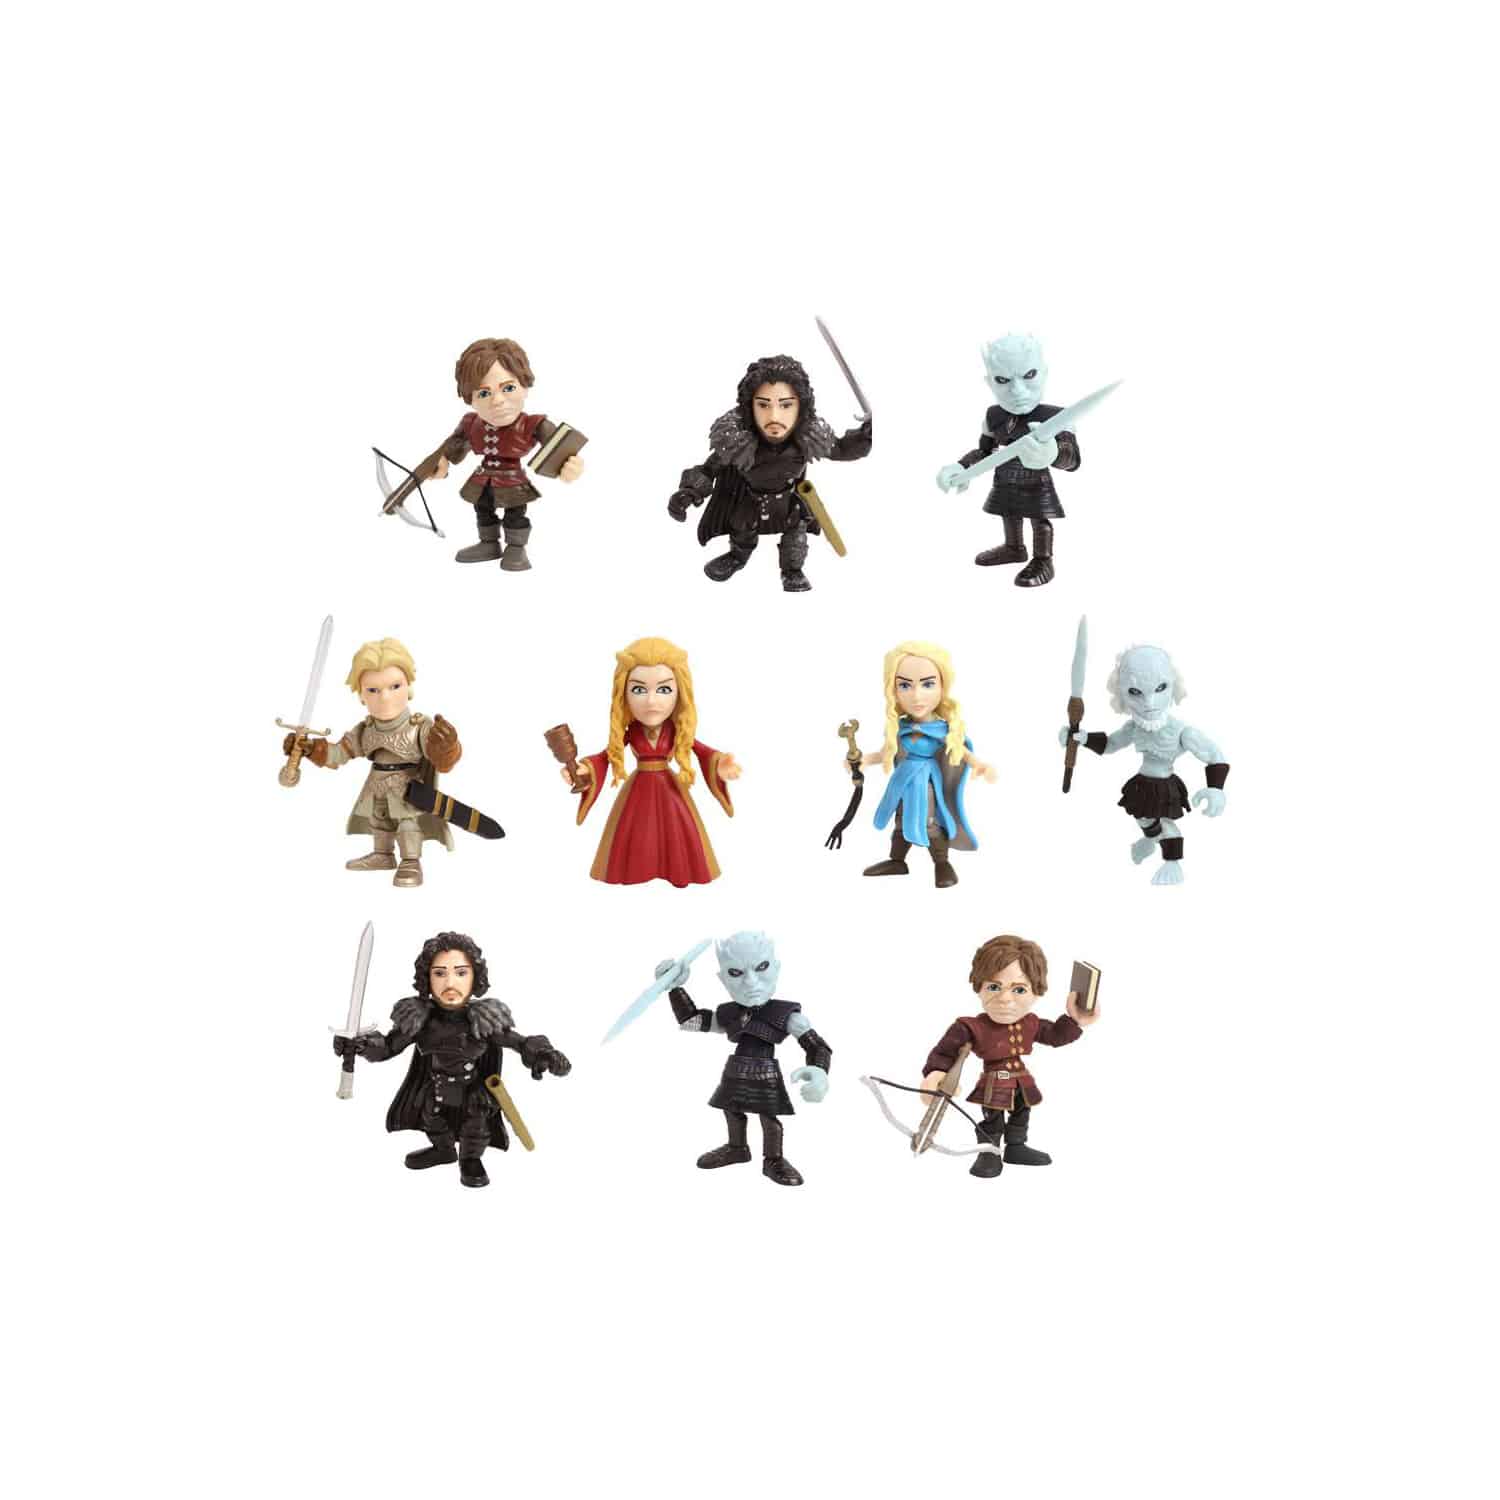 game-of-thrones-vinyl-figures-the-loyal-subjects